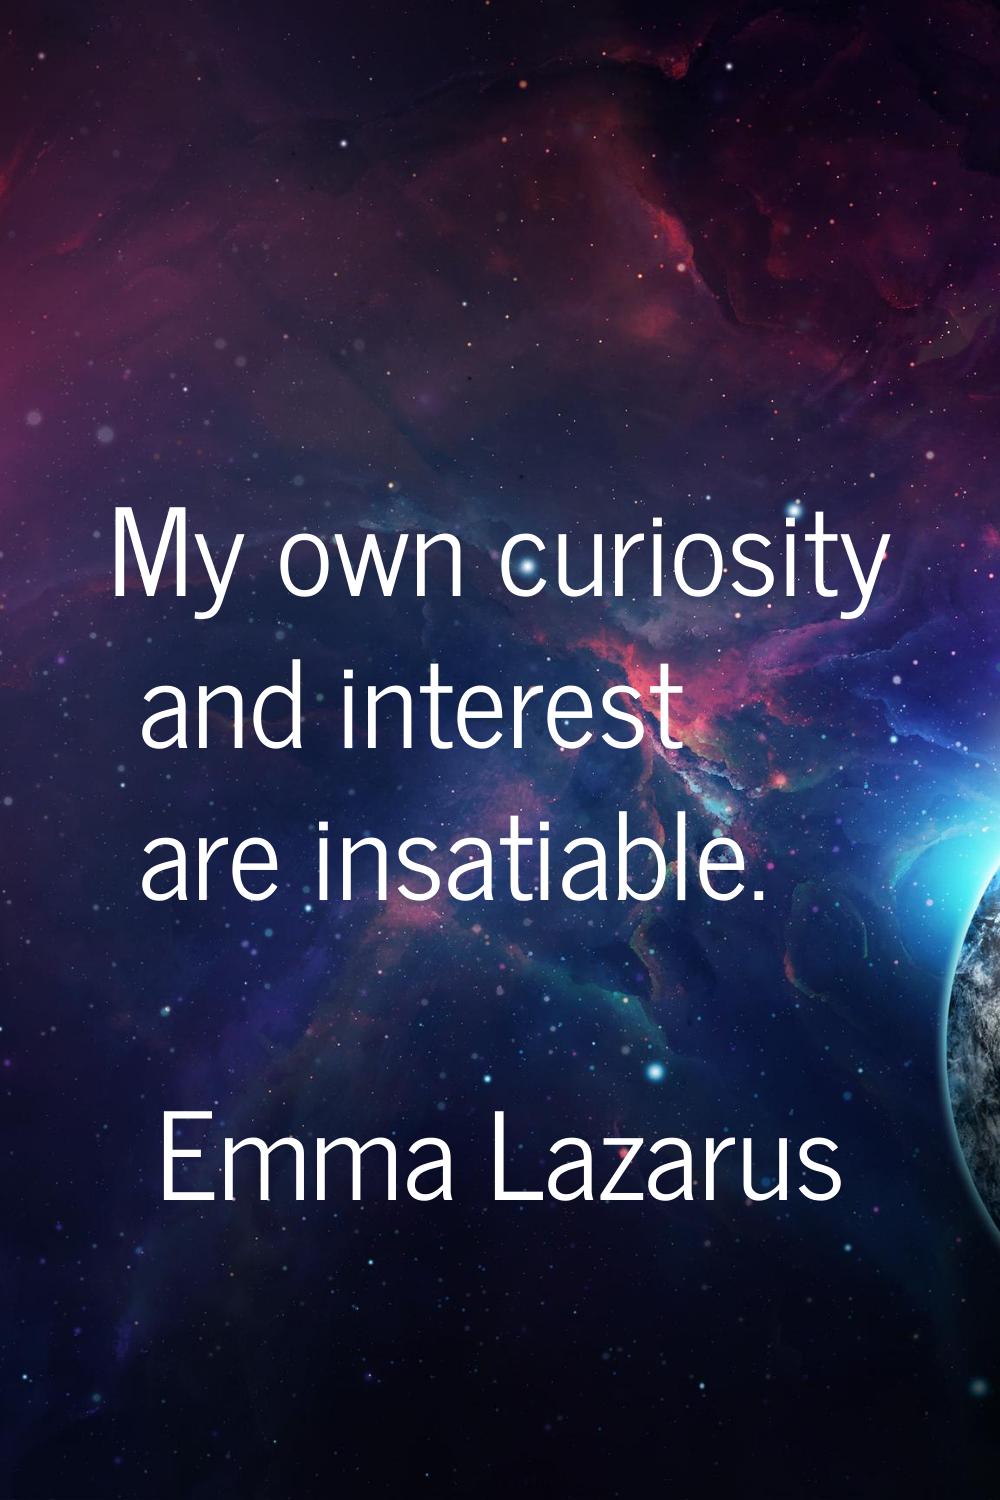 My own curiosity and interest are insatiable.